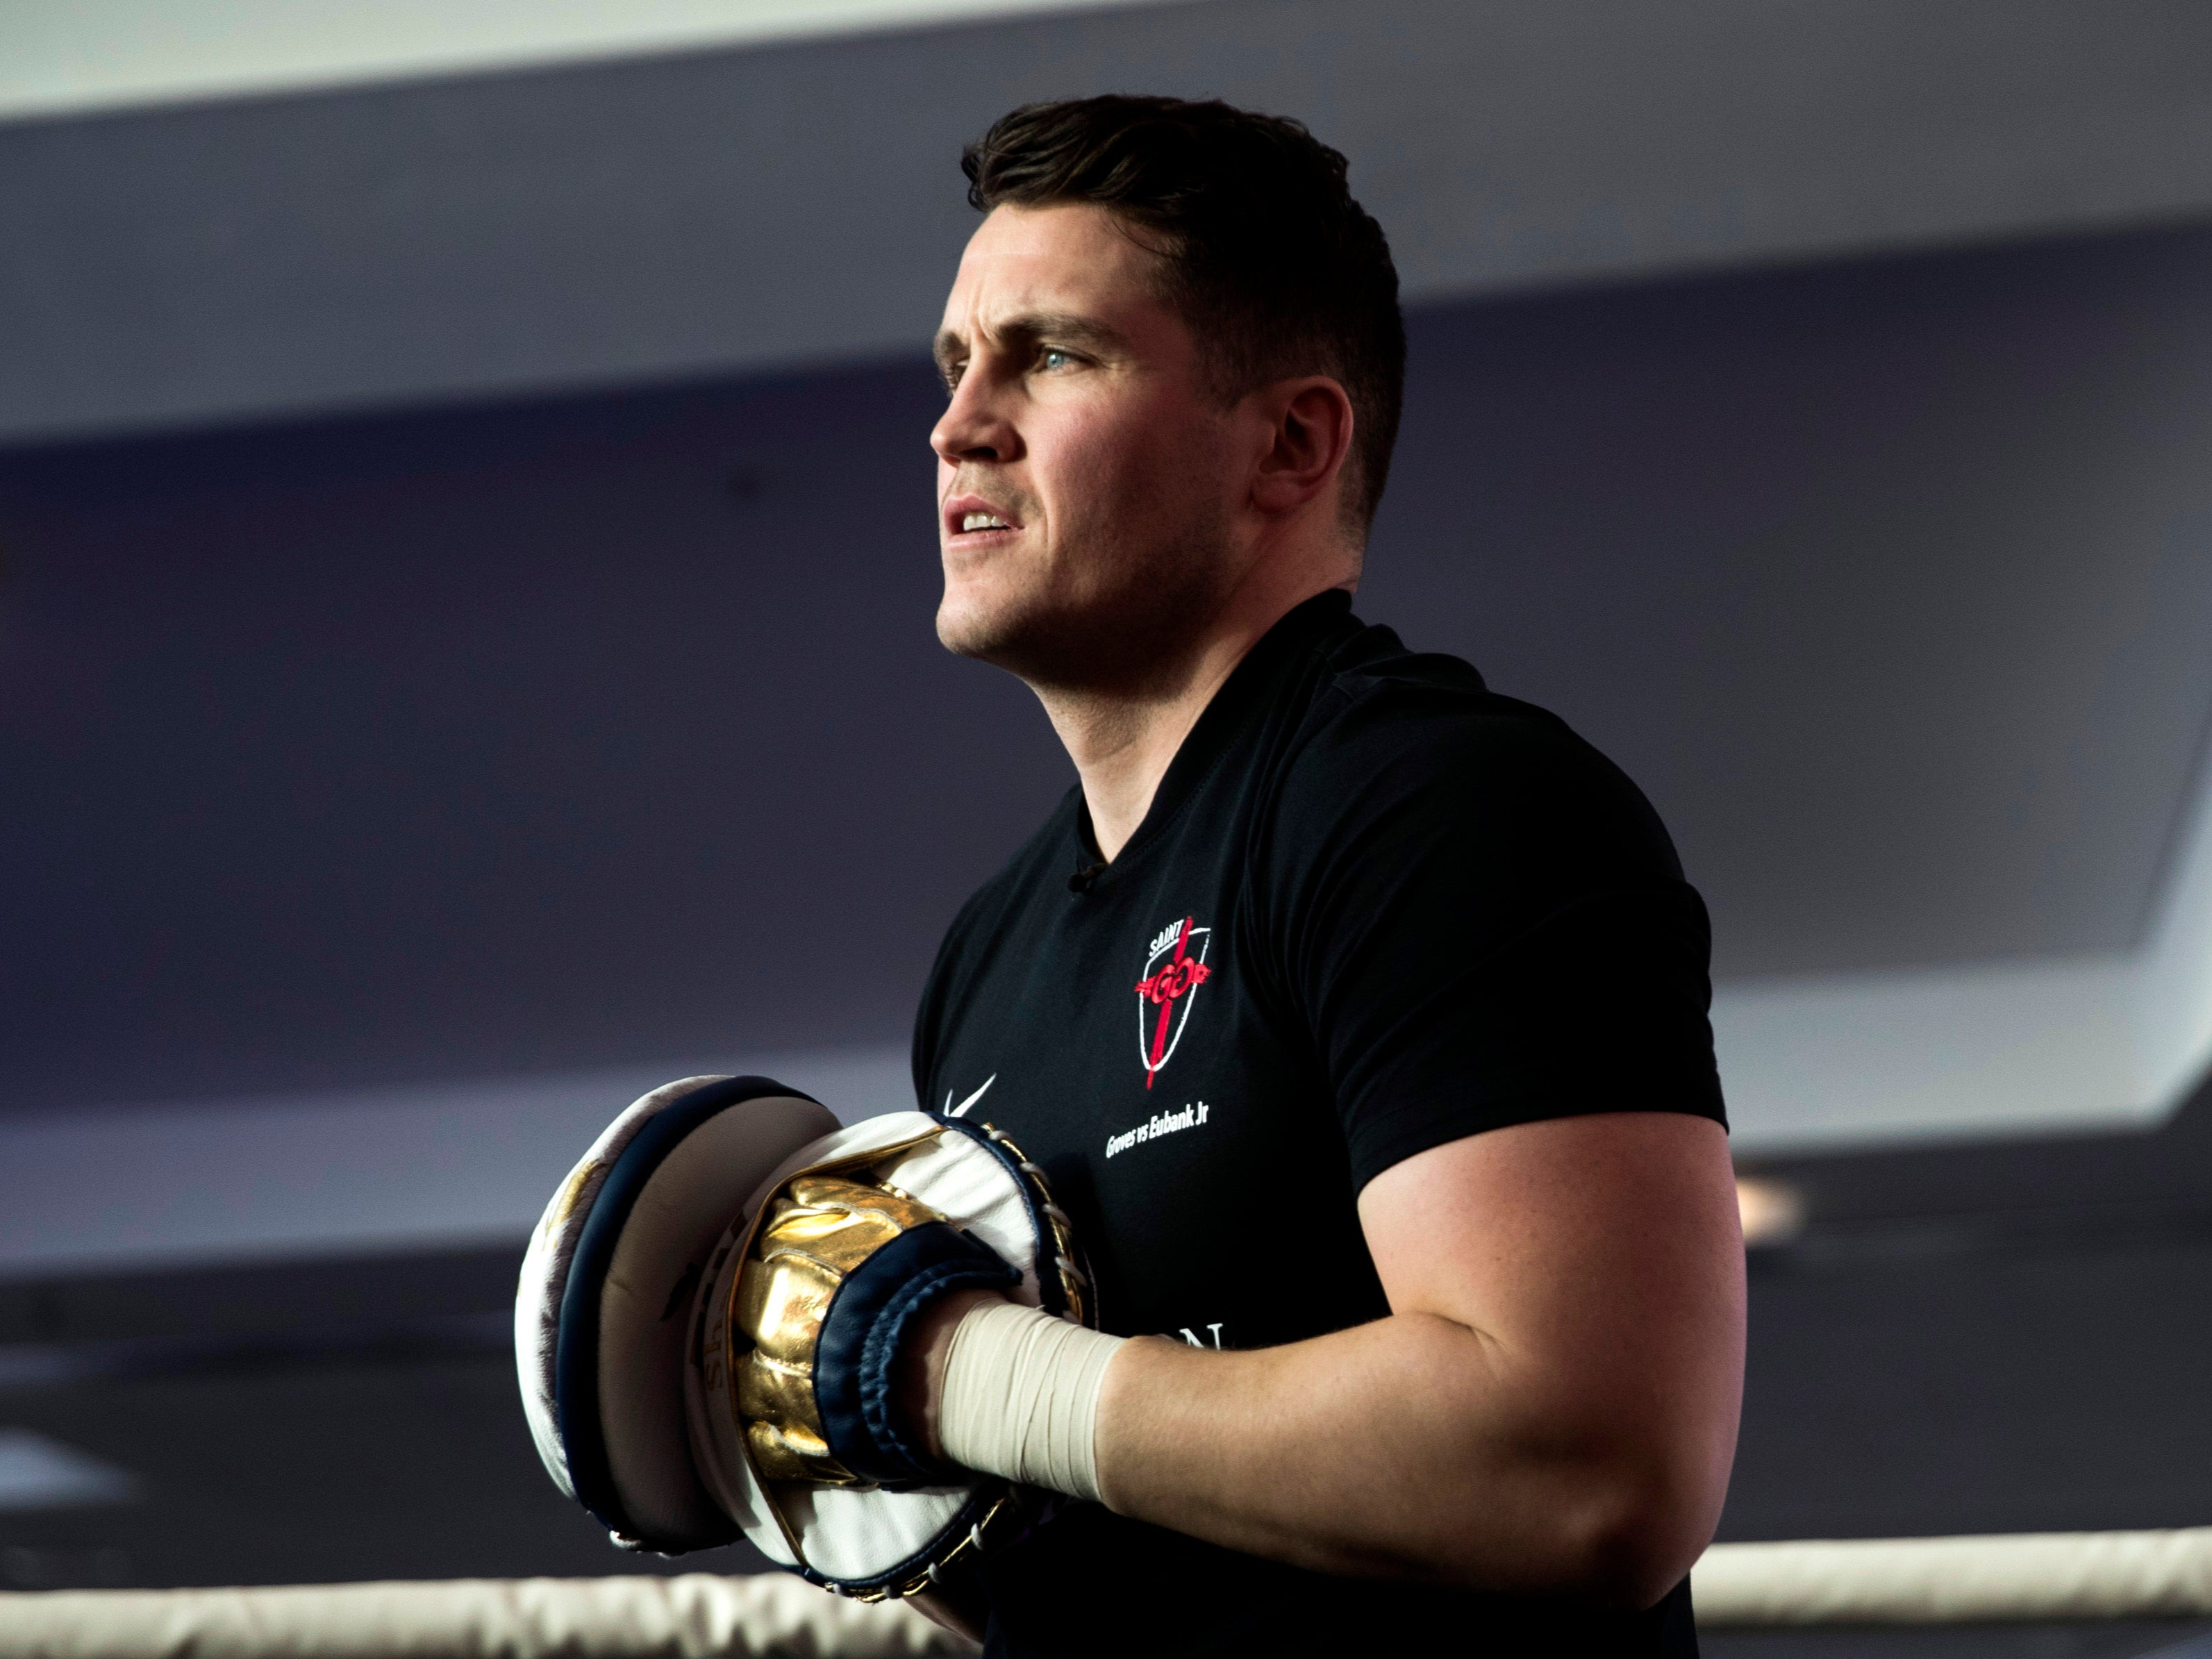 <p>McGuigan has trained four fighters to world titles since 2015, but a bitter legal dispute sorely tested his love for boxing </p>